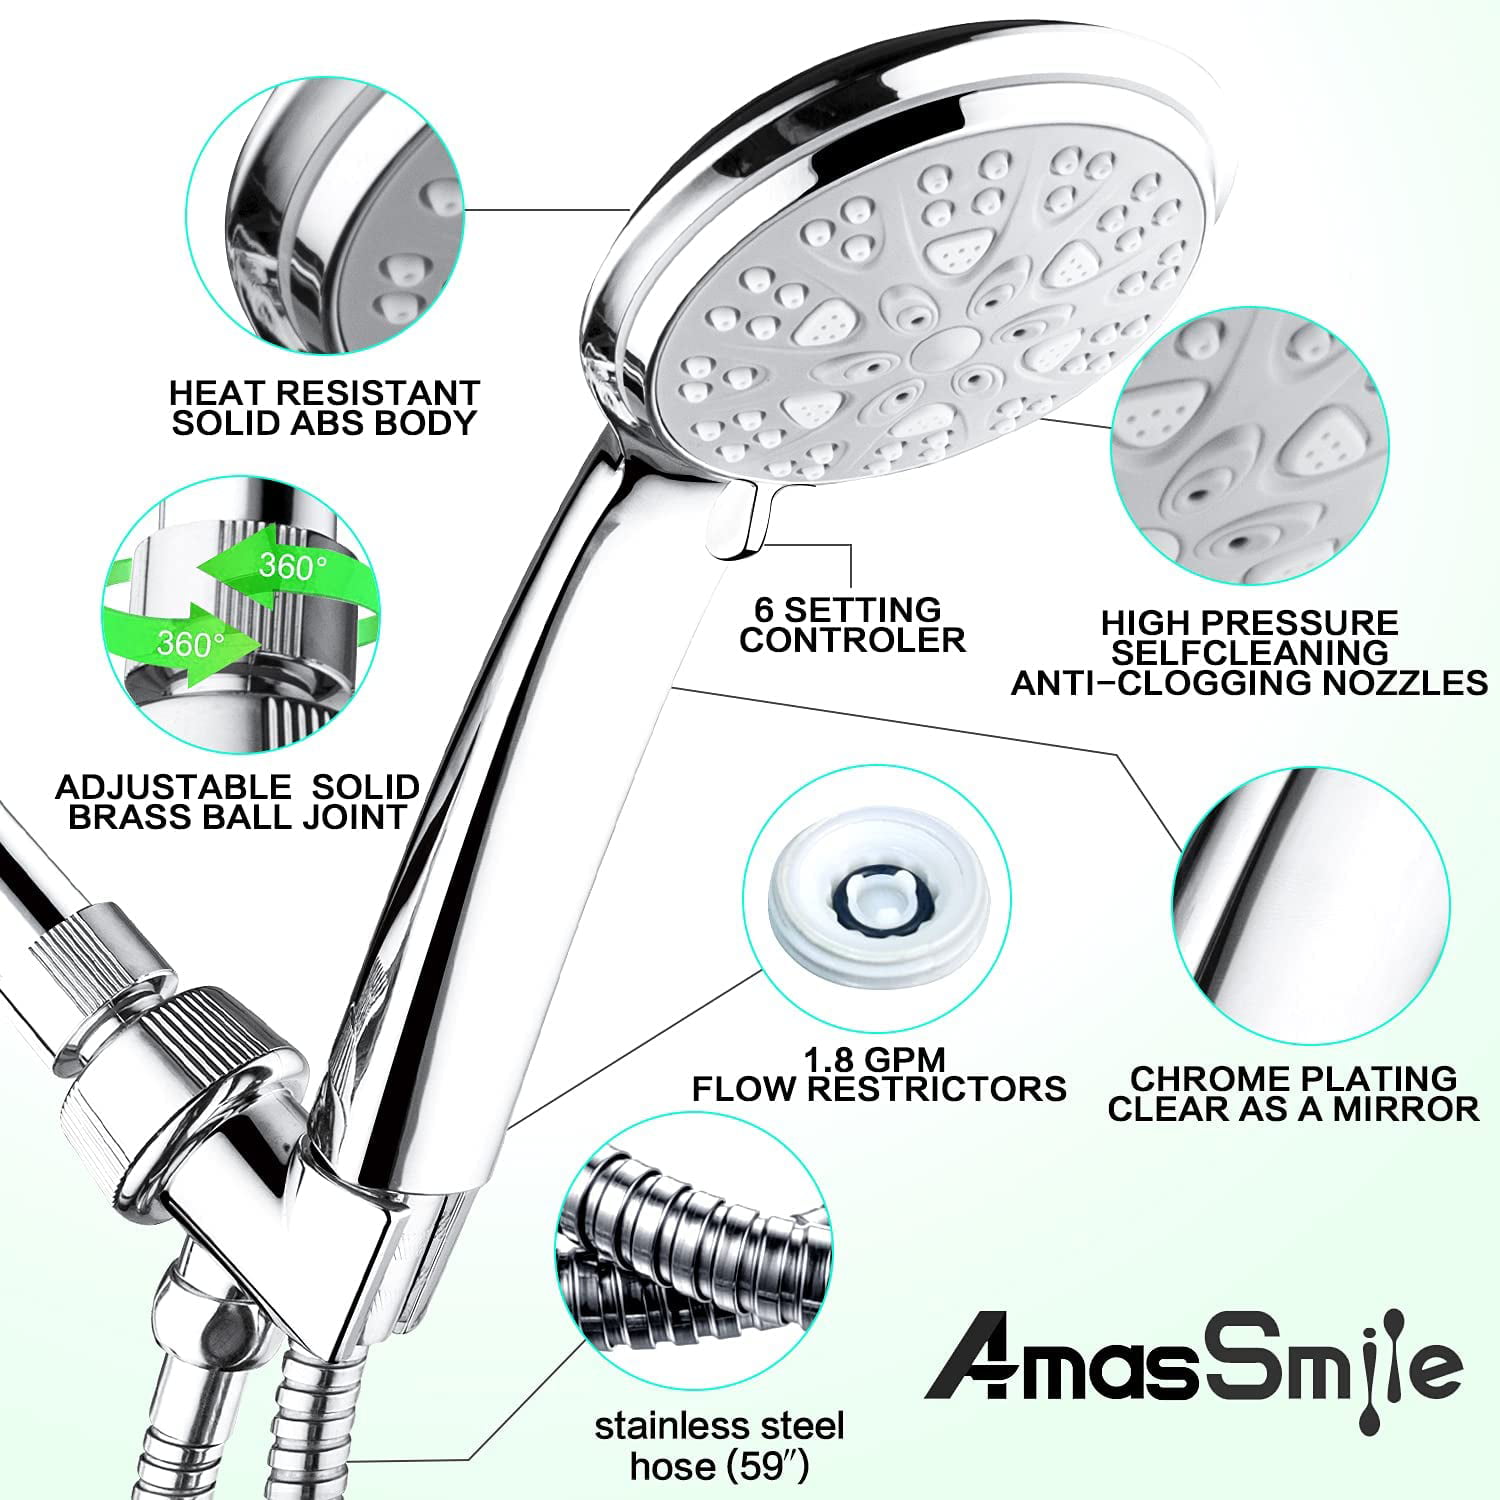 AmasSmile® Vortex Shower Head Ionic Filter Filtration Turbo High Pressure Water Saving 3 Mode Function Spray Turbocharged Hydro Jet Handheld Showerheads for Dry Skin & Hair 